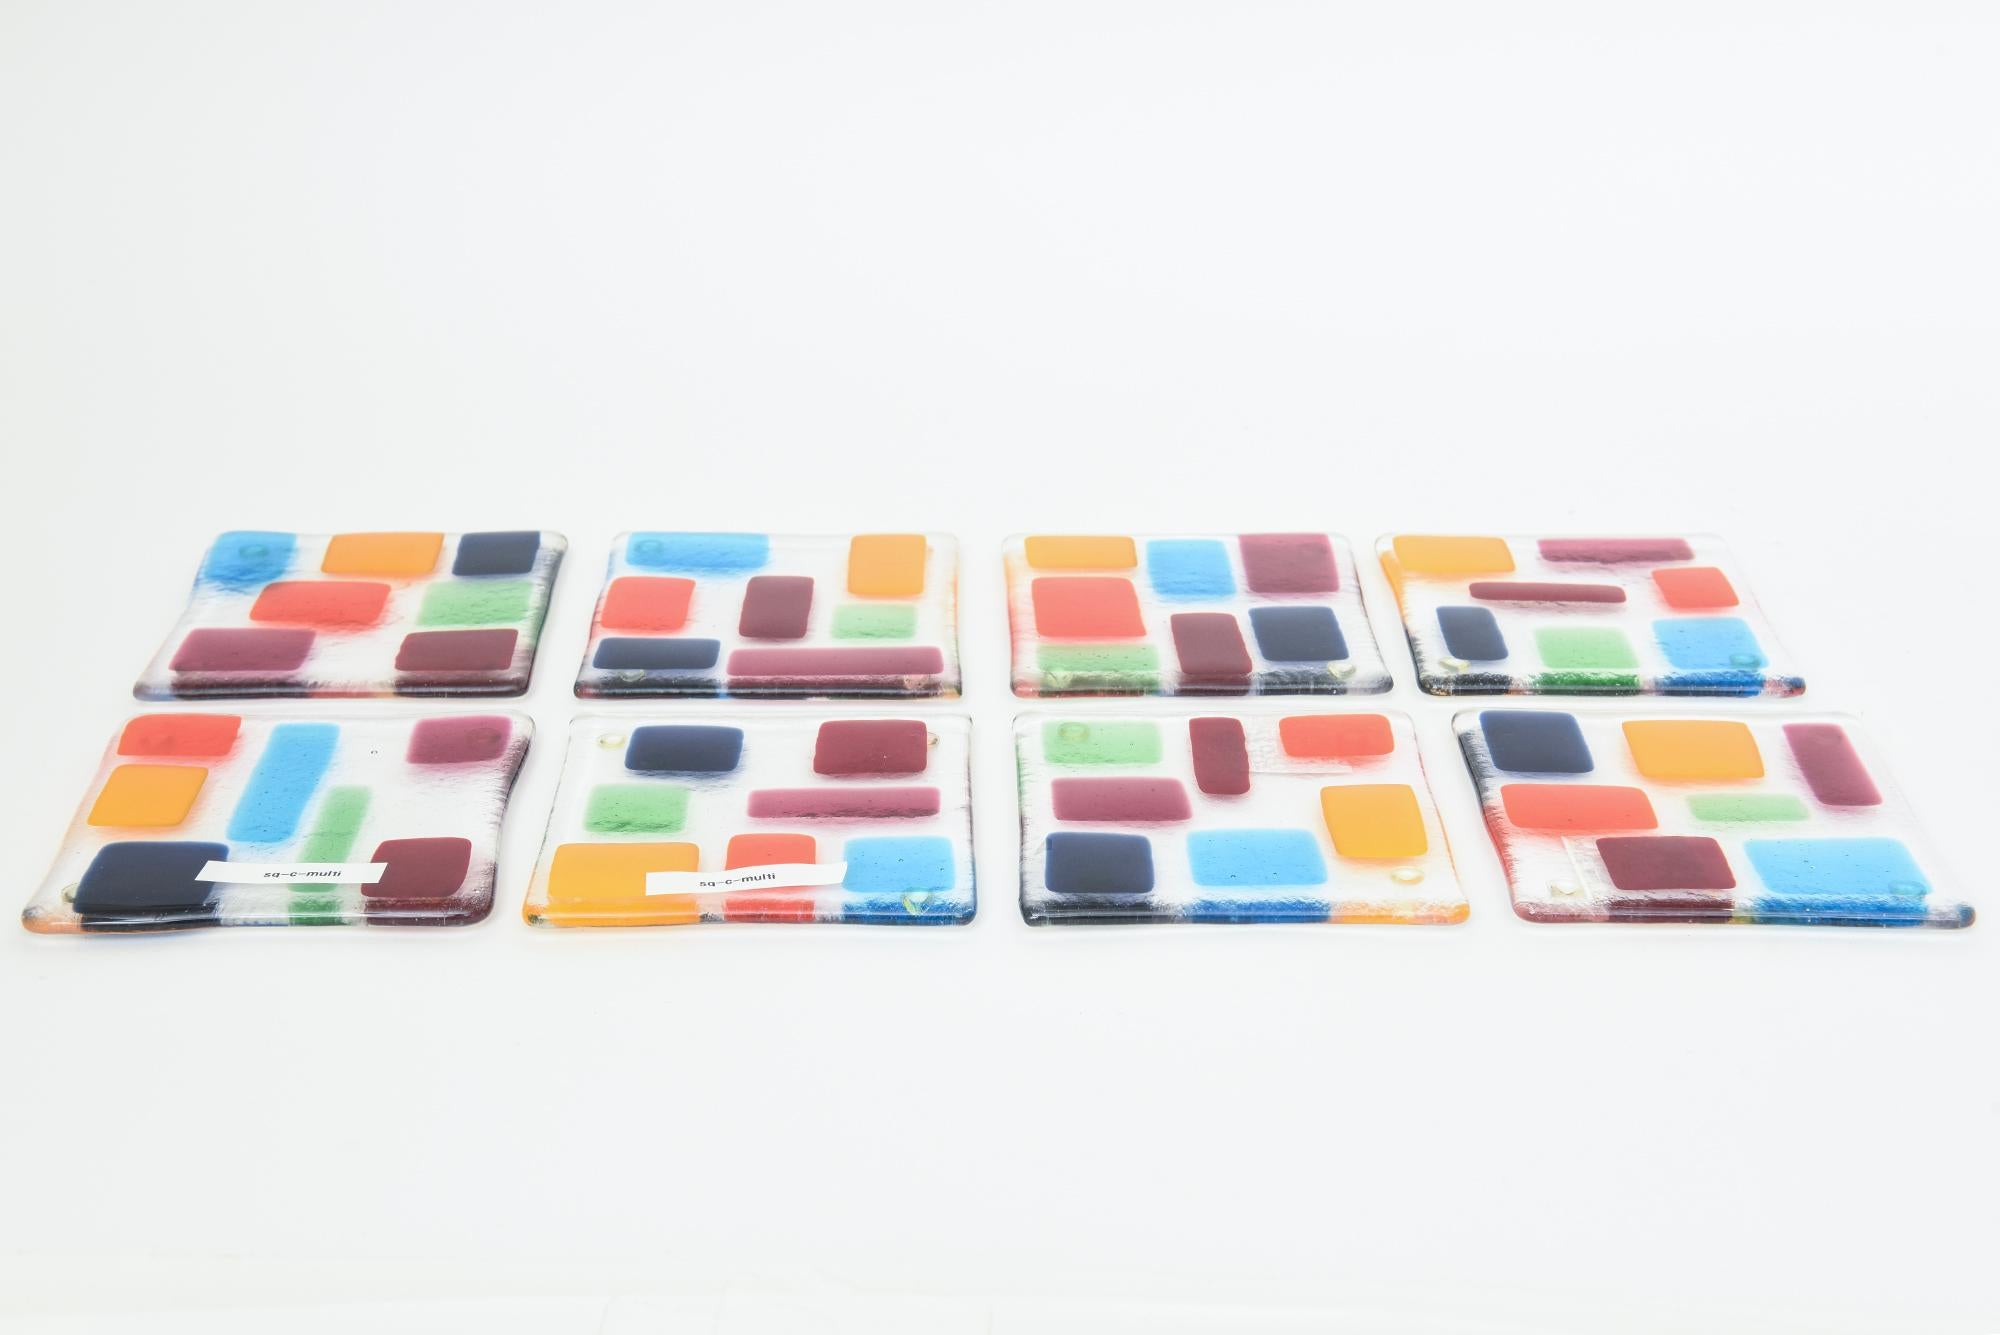 This set of fabulous and colorfu lMurano fused glass block coasters are from the 90's and were never ever used. Brand new. They have the original stickers on them from Barney's and came on the Barney's box. What we were told is that they are by a